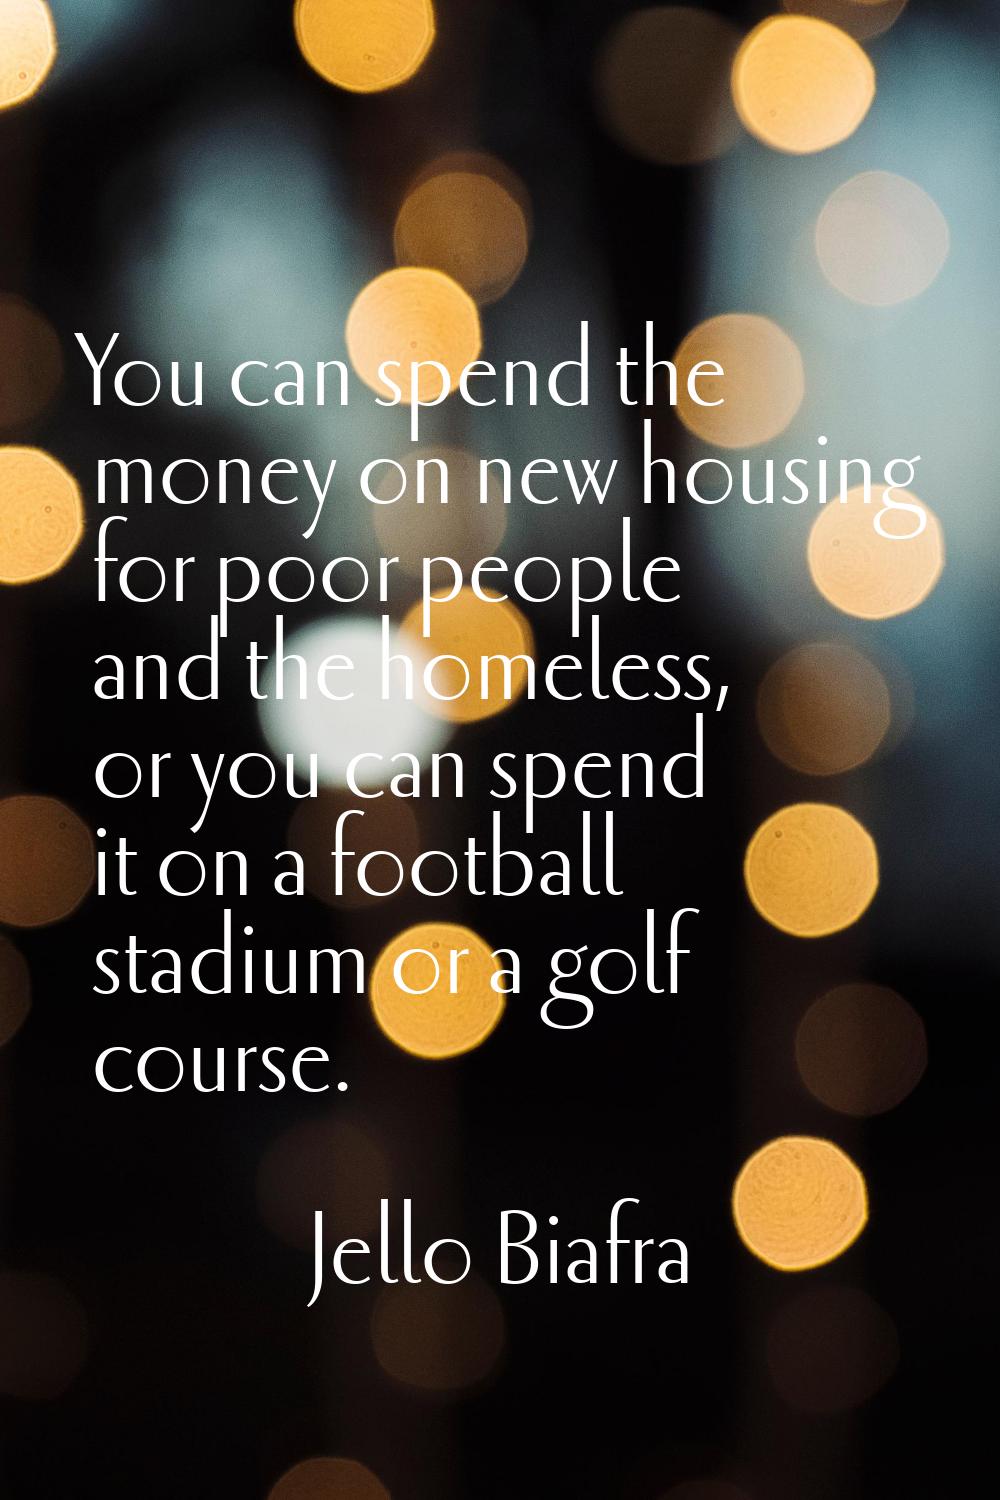 You can spend the money on new housing for poor people and the homeless, or you can spend it on a f